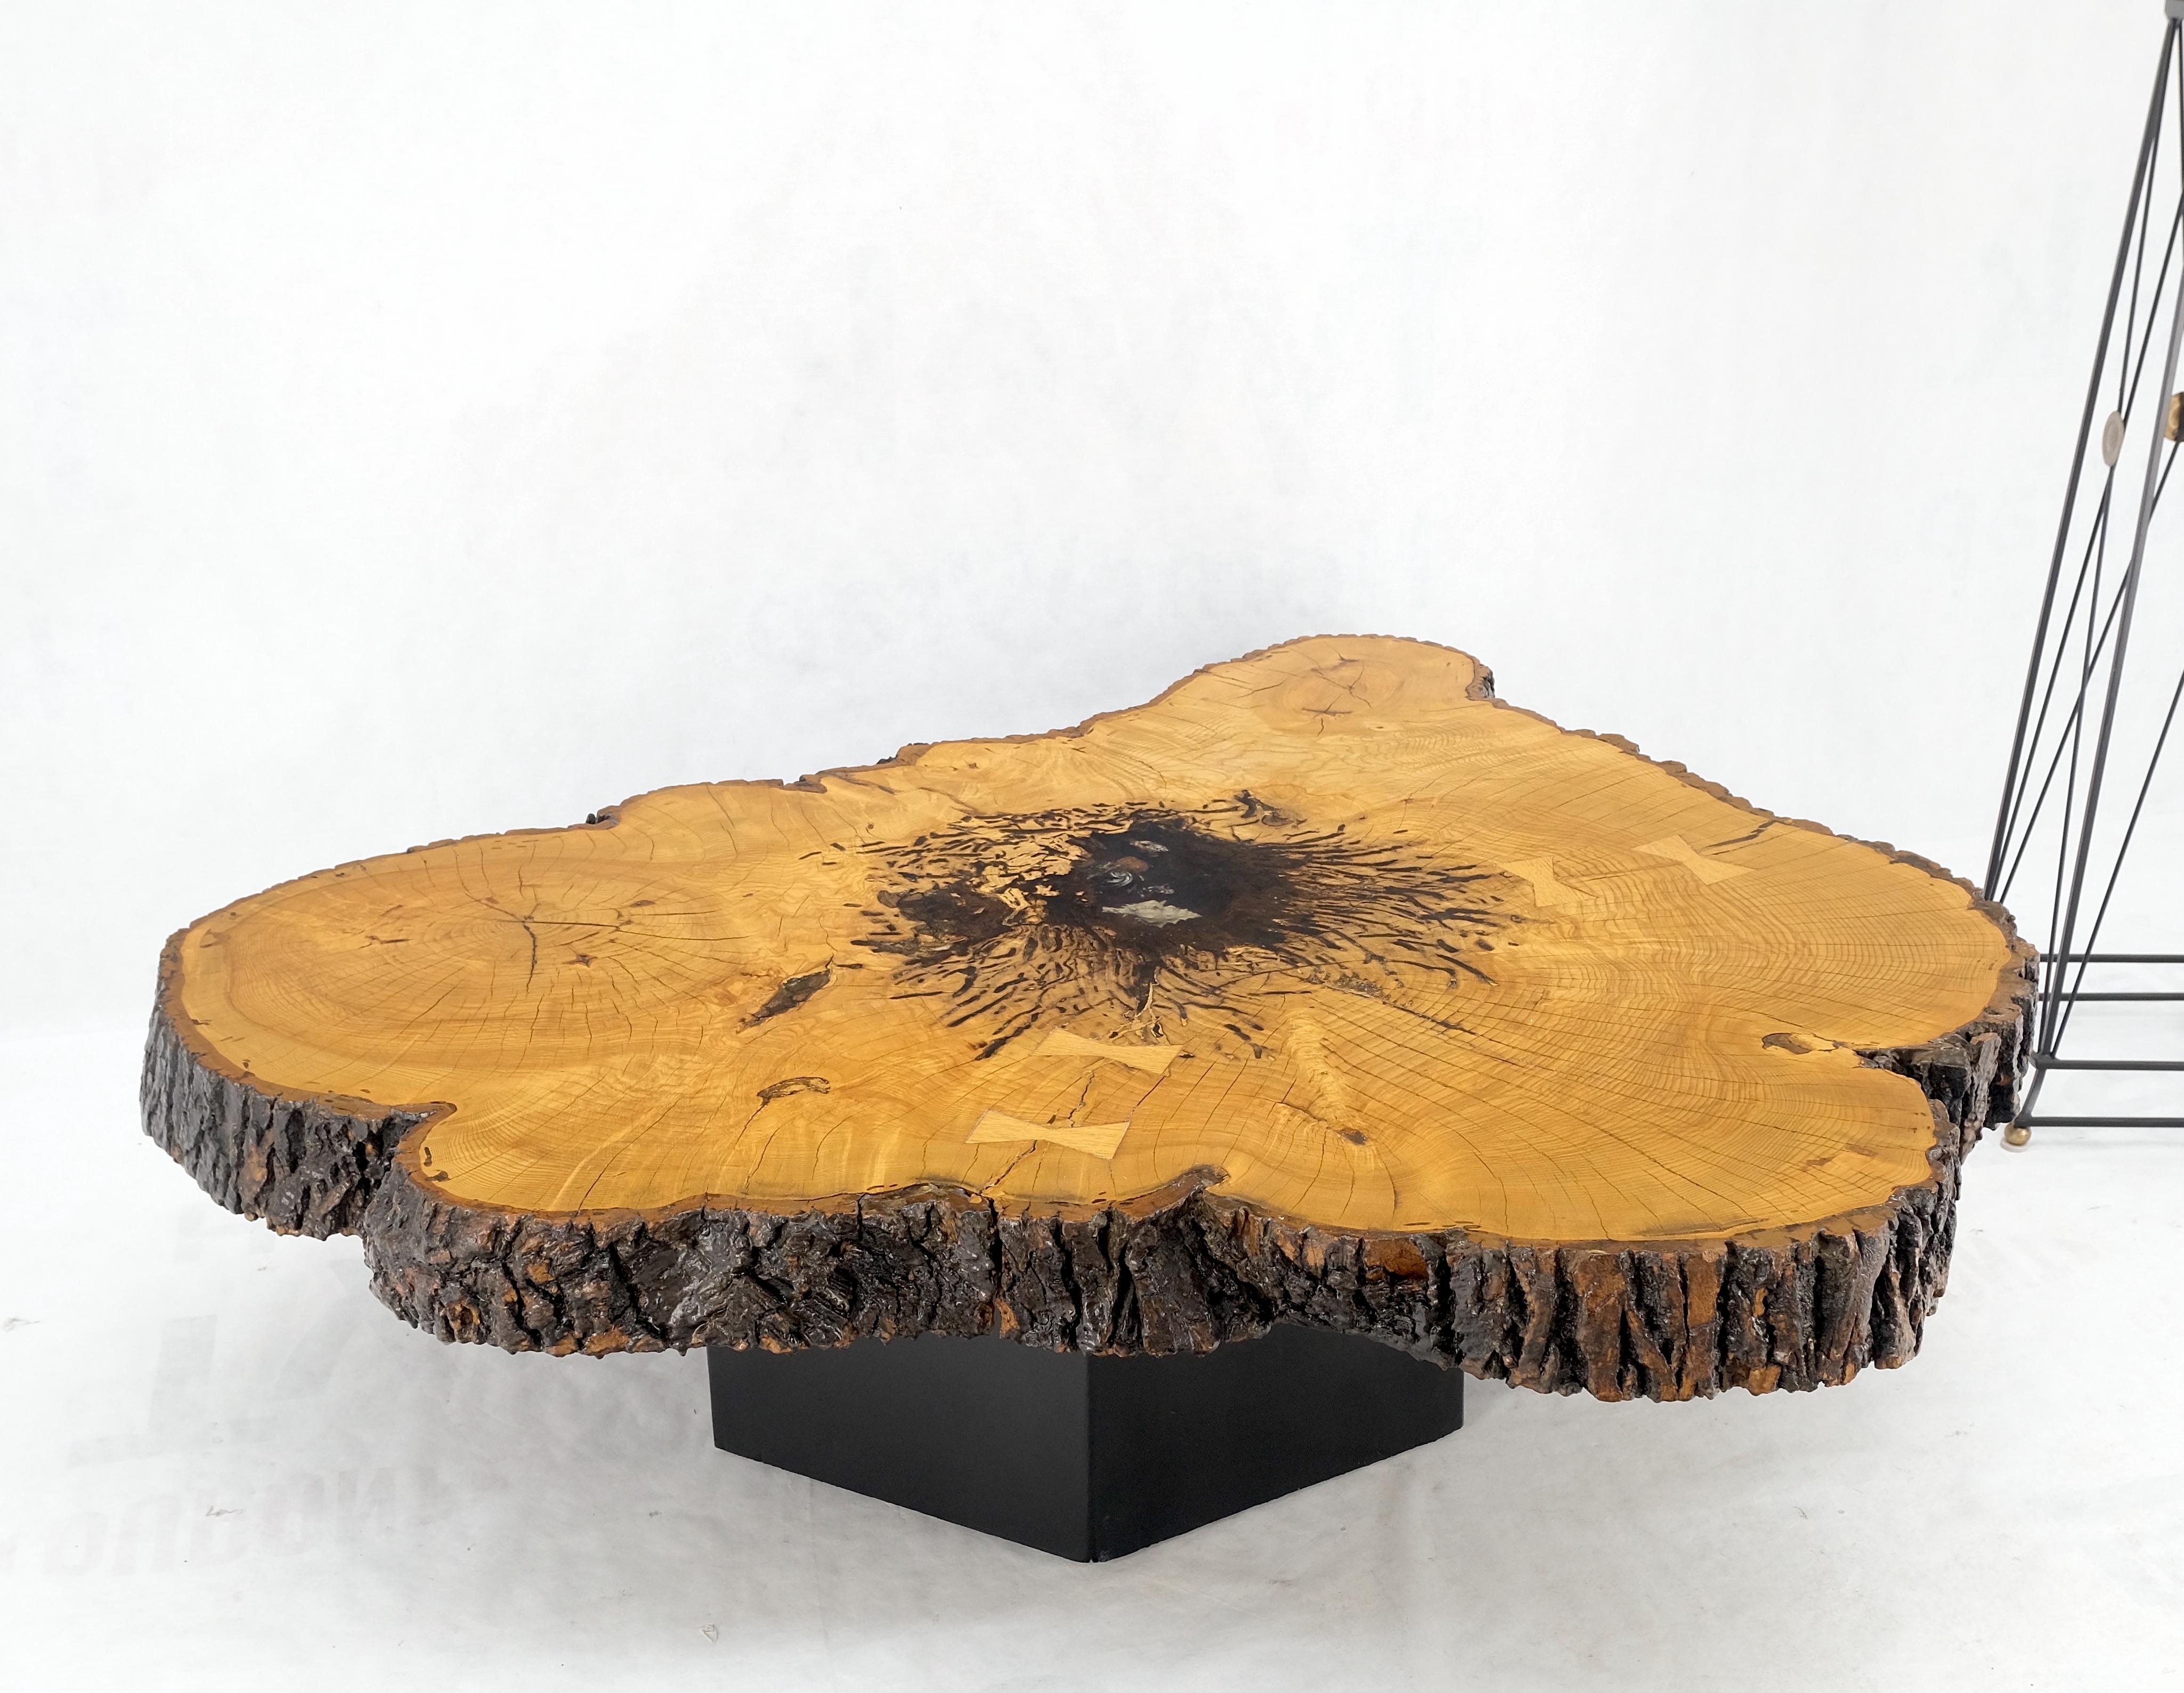 Large Vintage circa 1970s thick slab live edge organic coffee table butterfly joints nice patina!
Center is decorated with sea shell sealed in clear resin.